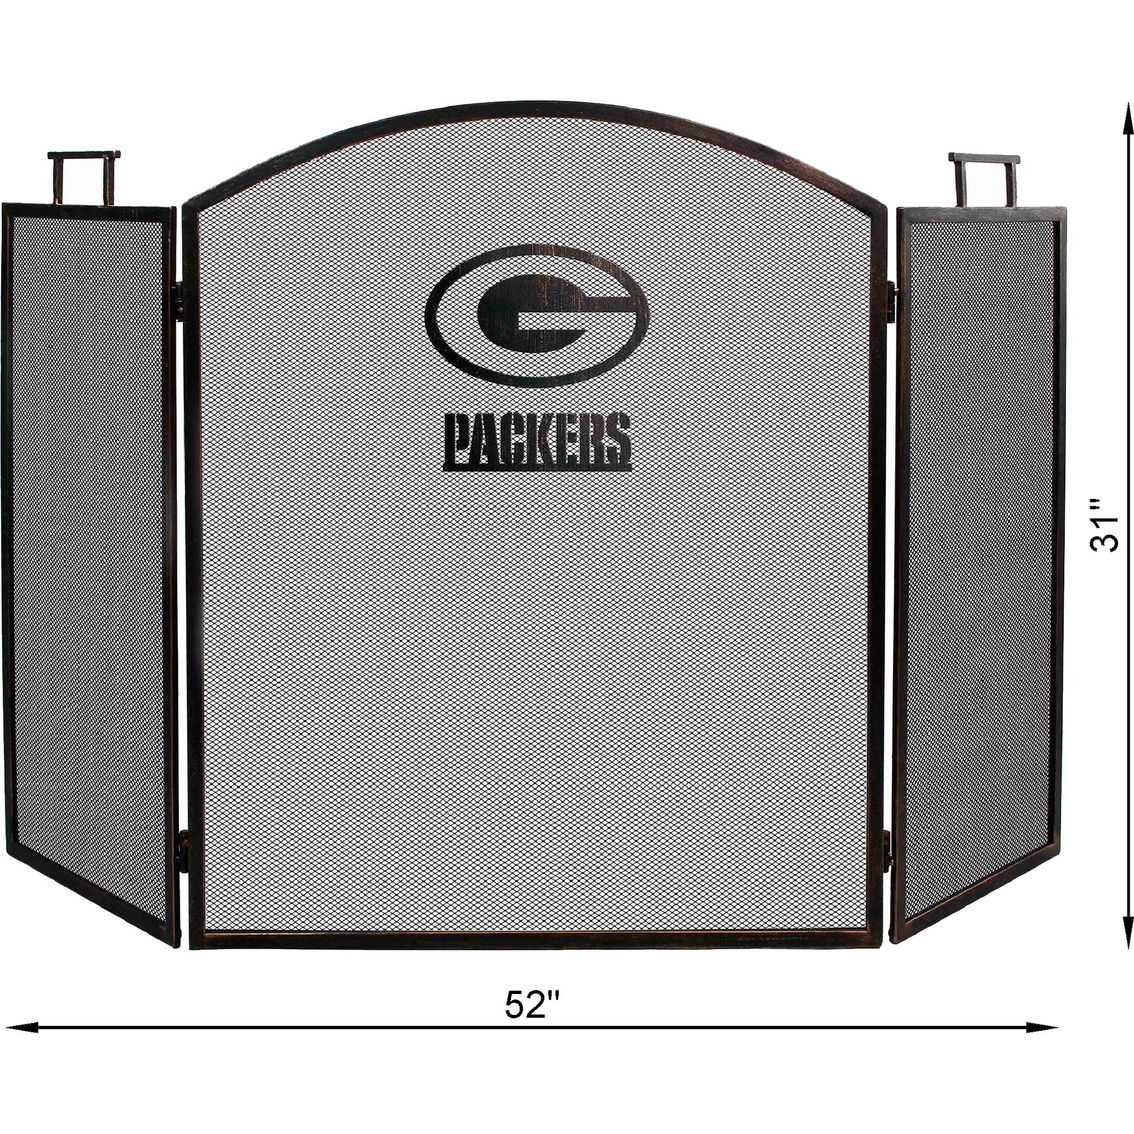 Imperial NFL Football Fireplace Screen - Image 2 of 3